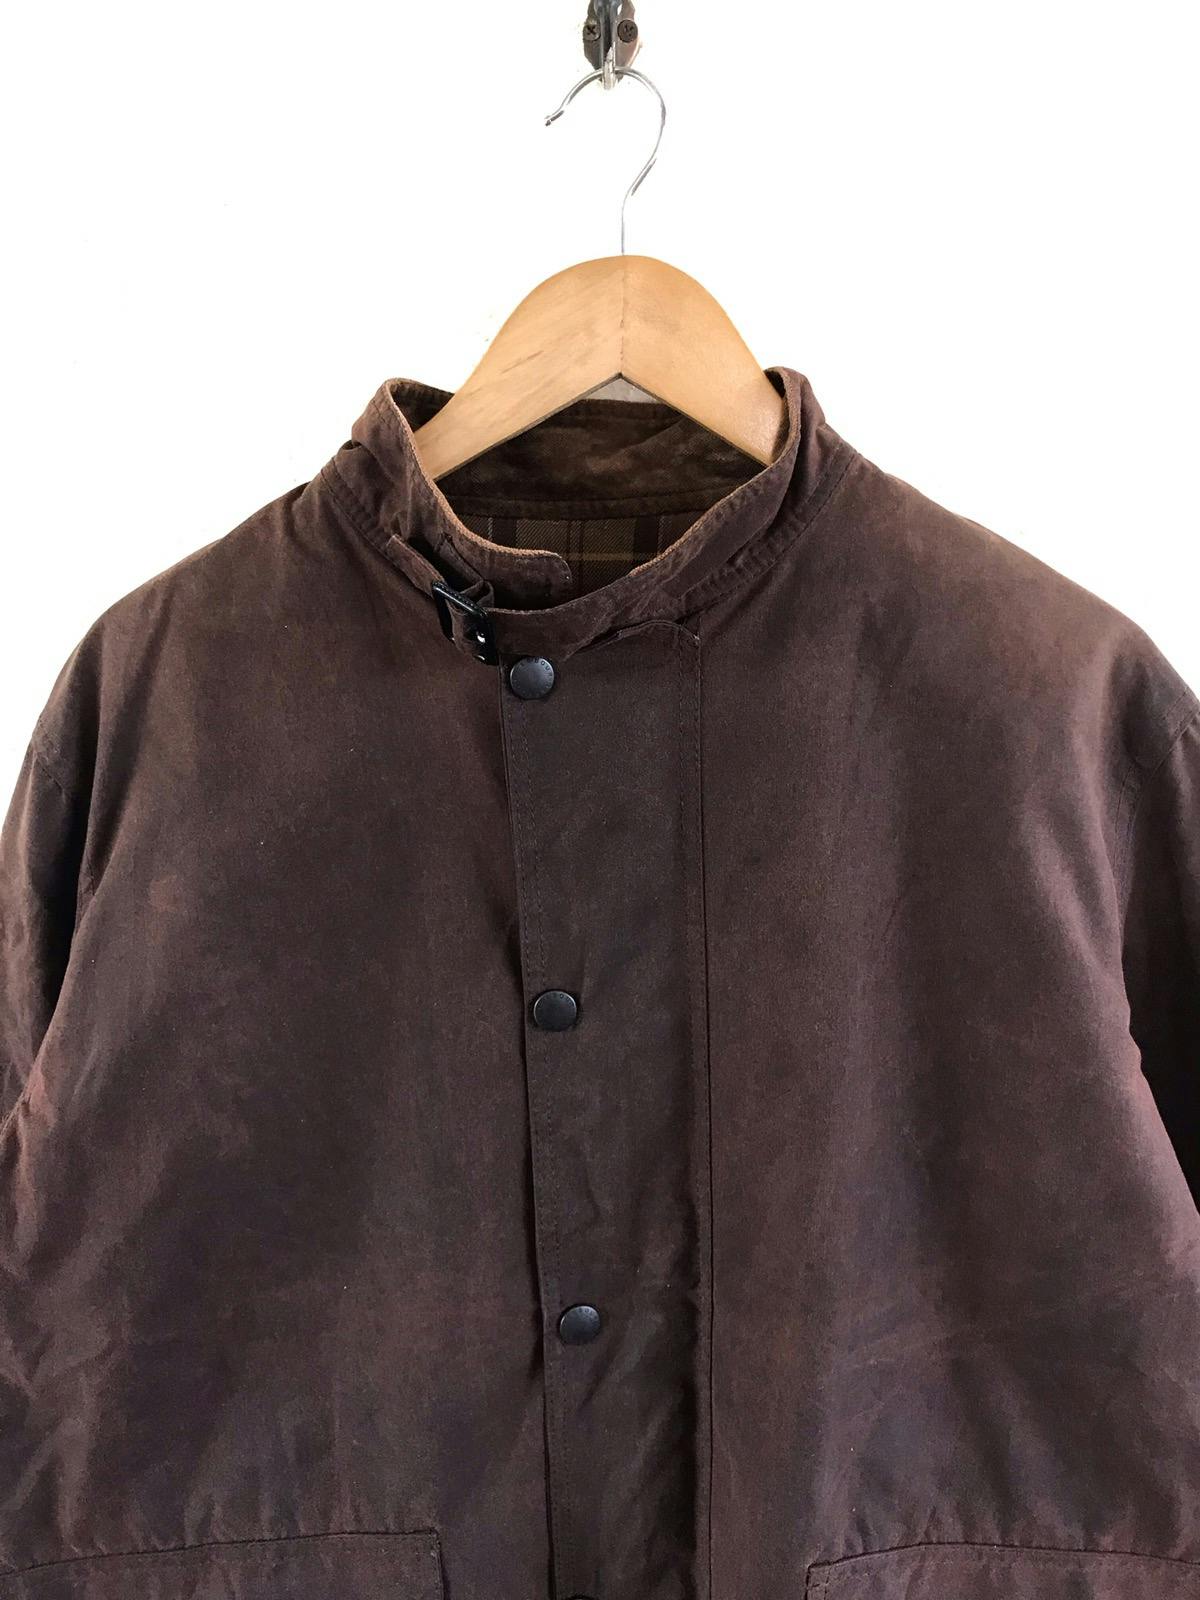 Barbour Wax Jacket Made in England - 2